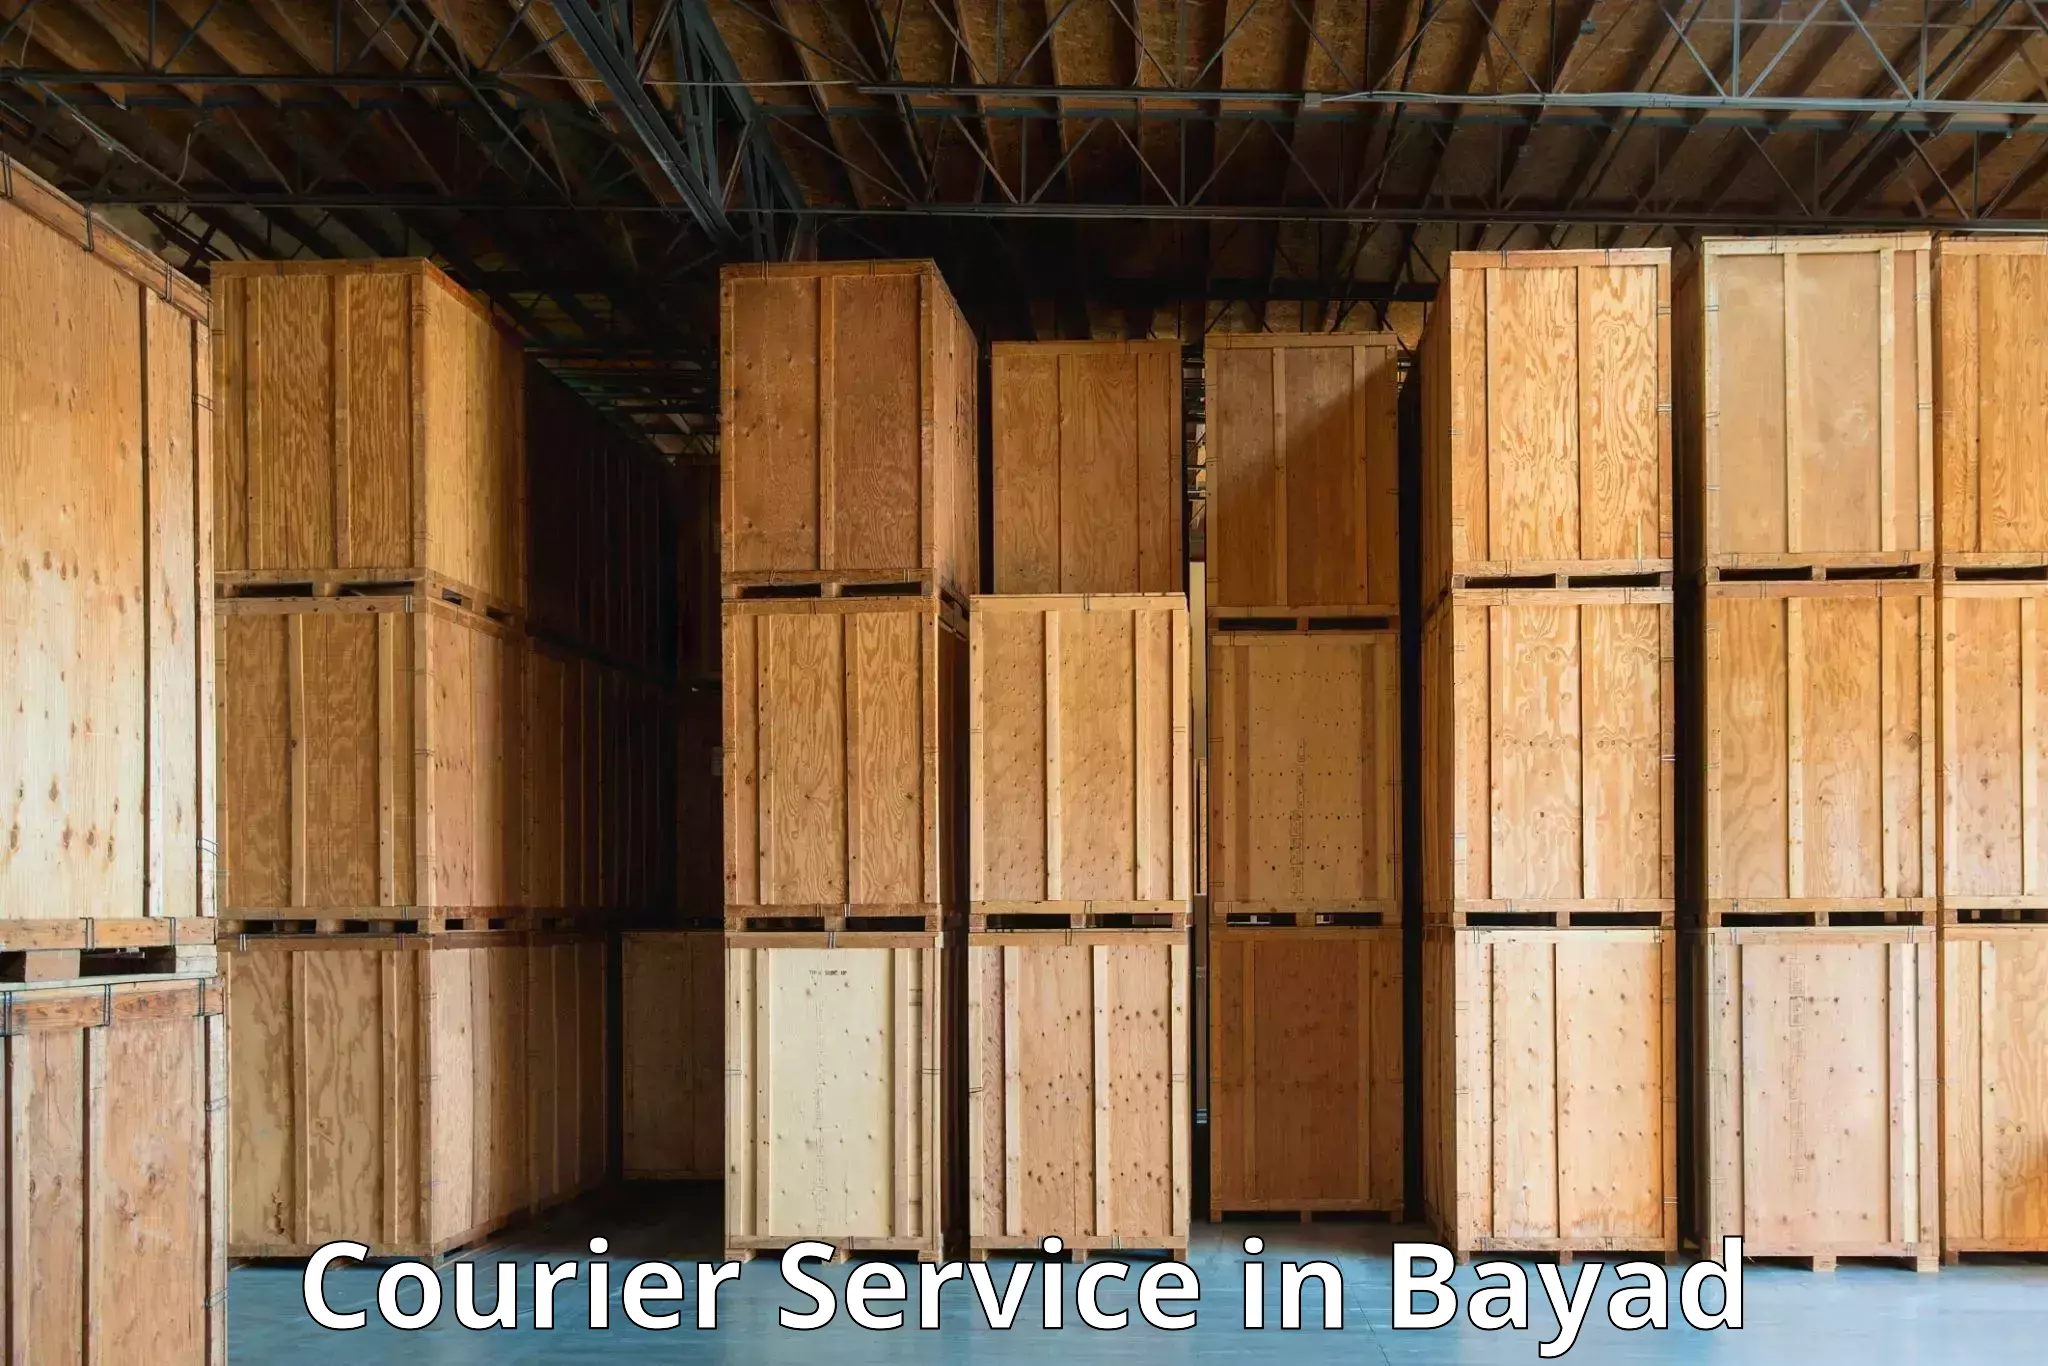 Efficient shipping operations in Bayad